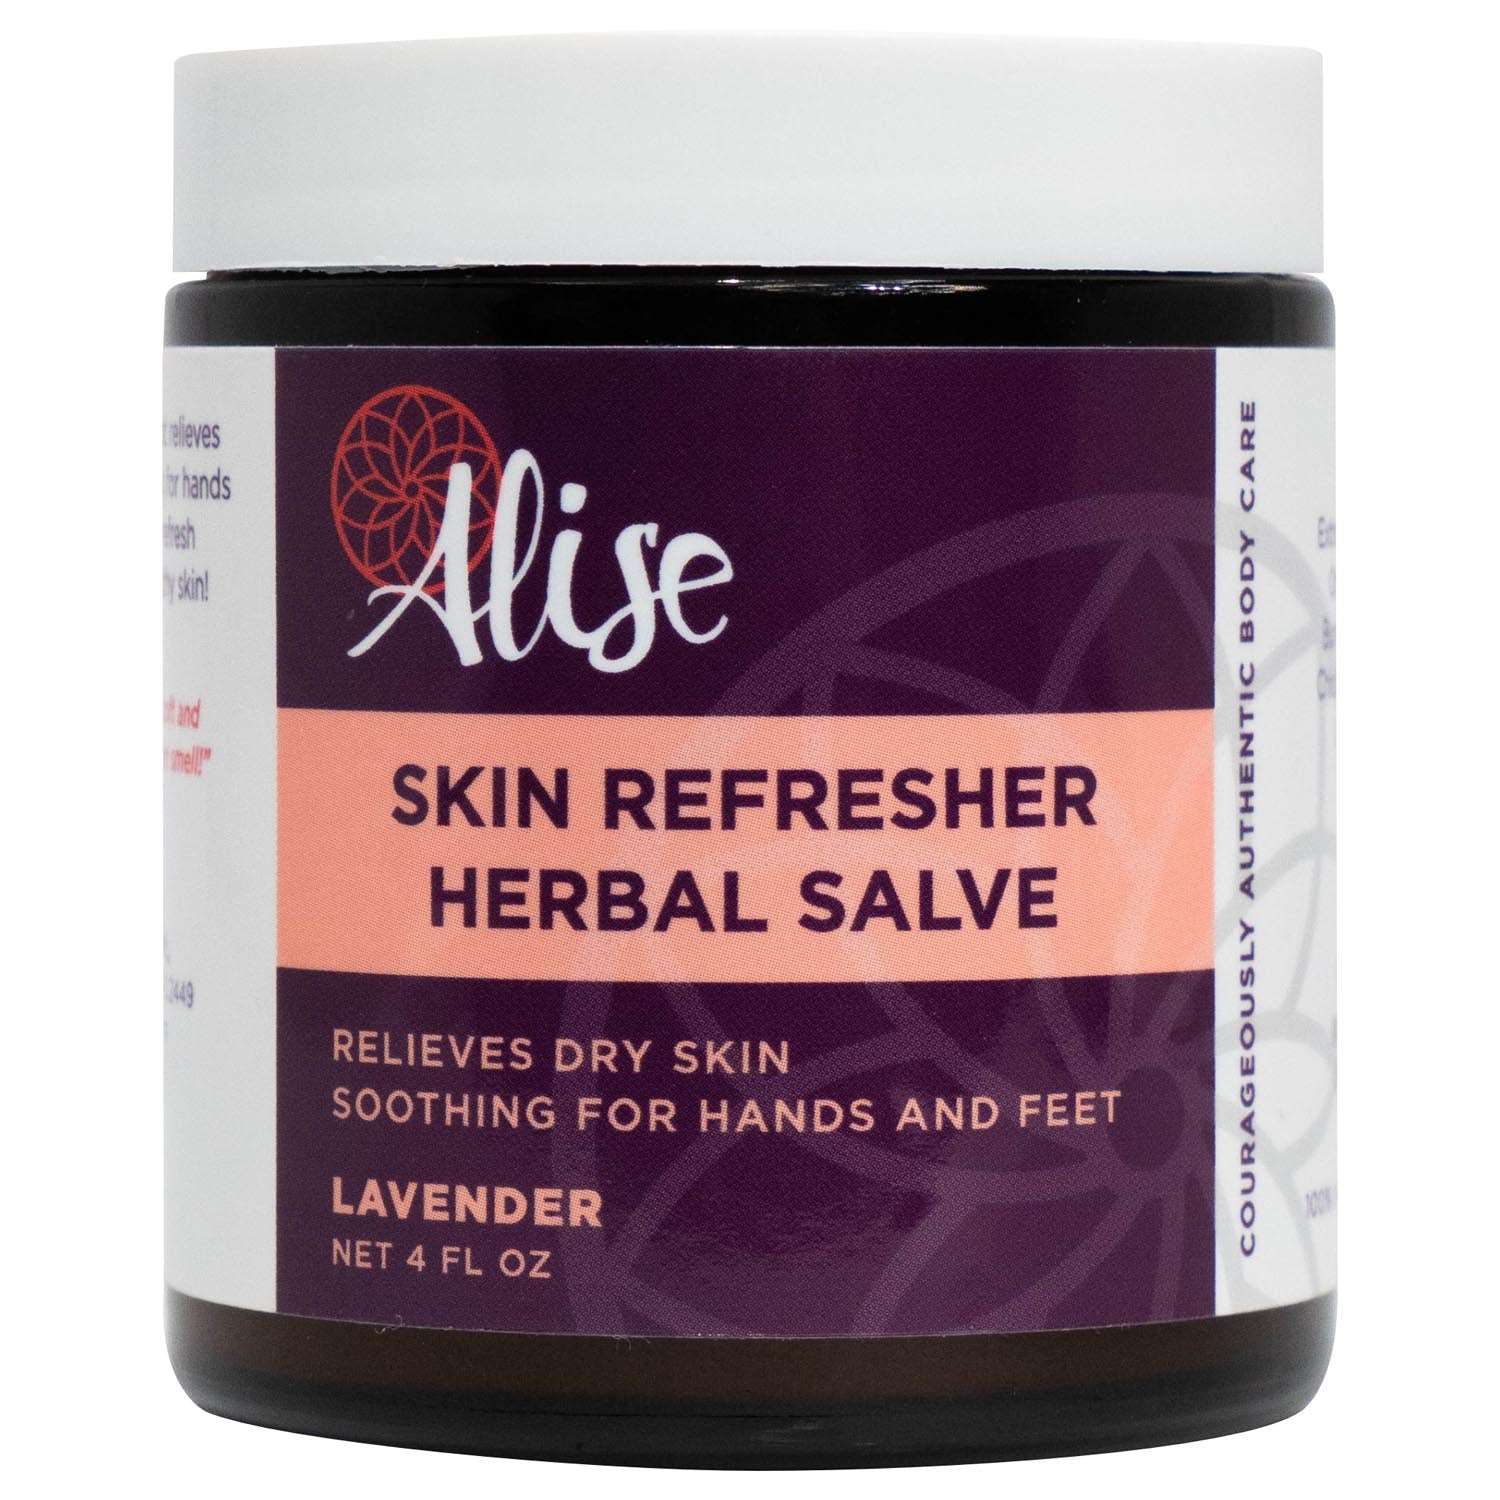 Skin Refresher Herbal Salve Lavender 4oz handcrafted by Alise Body Care